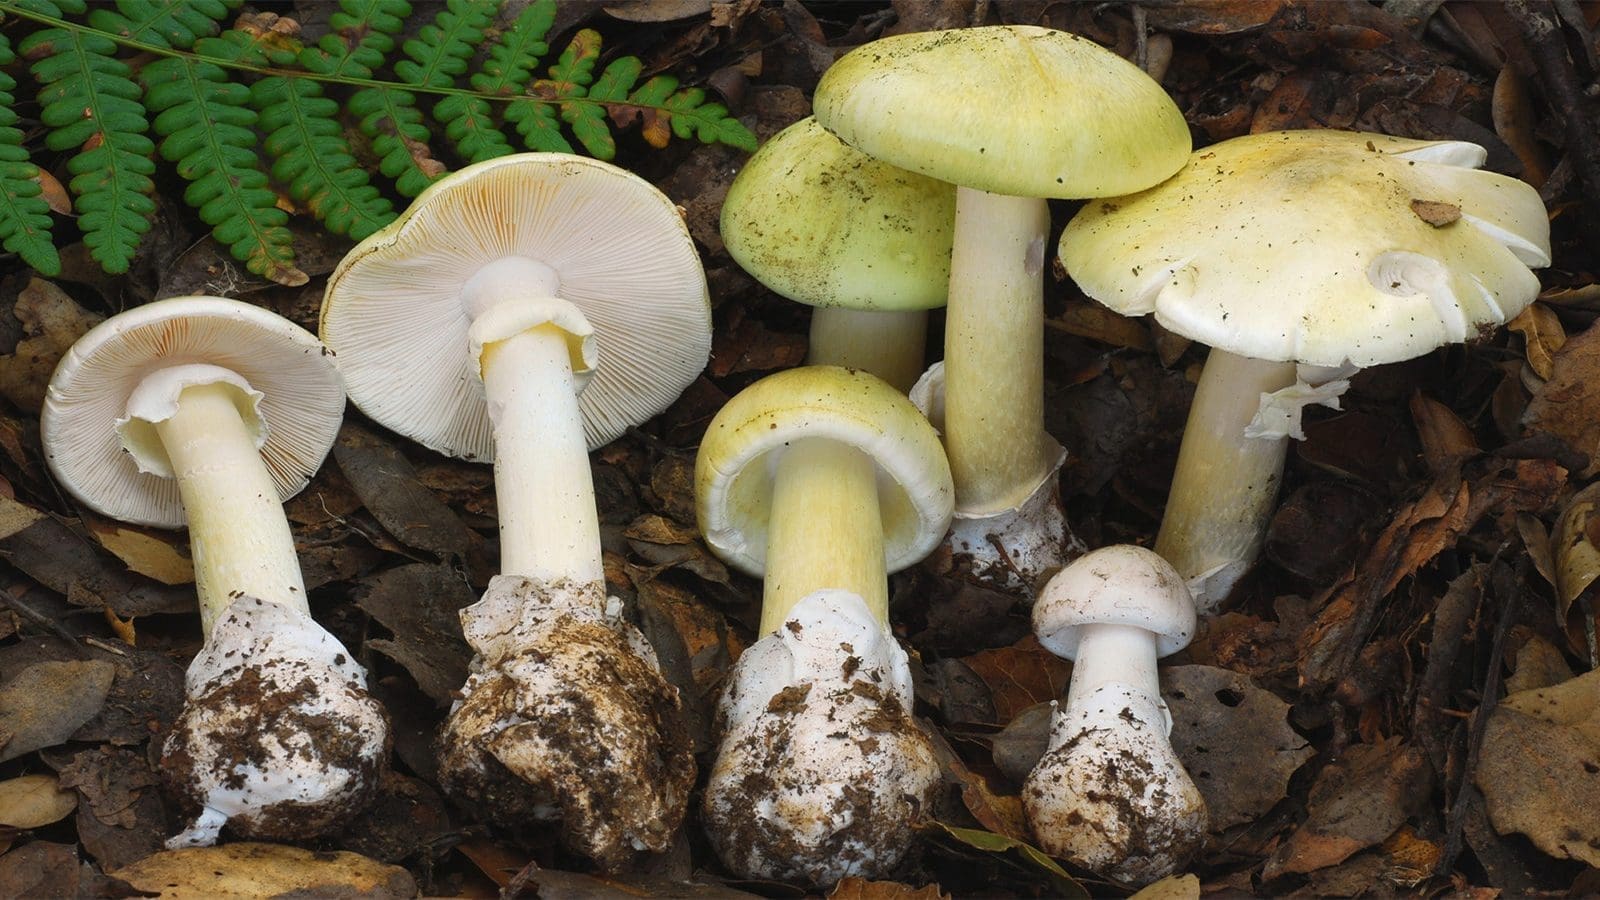 France reports more than 60 wild mushrooms intoxication cases